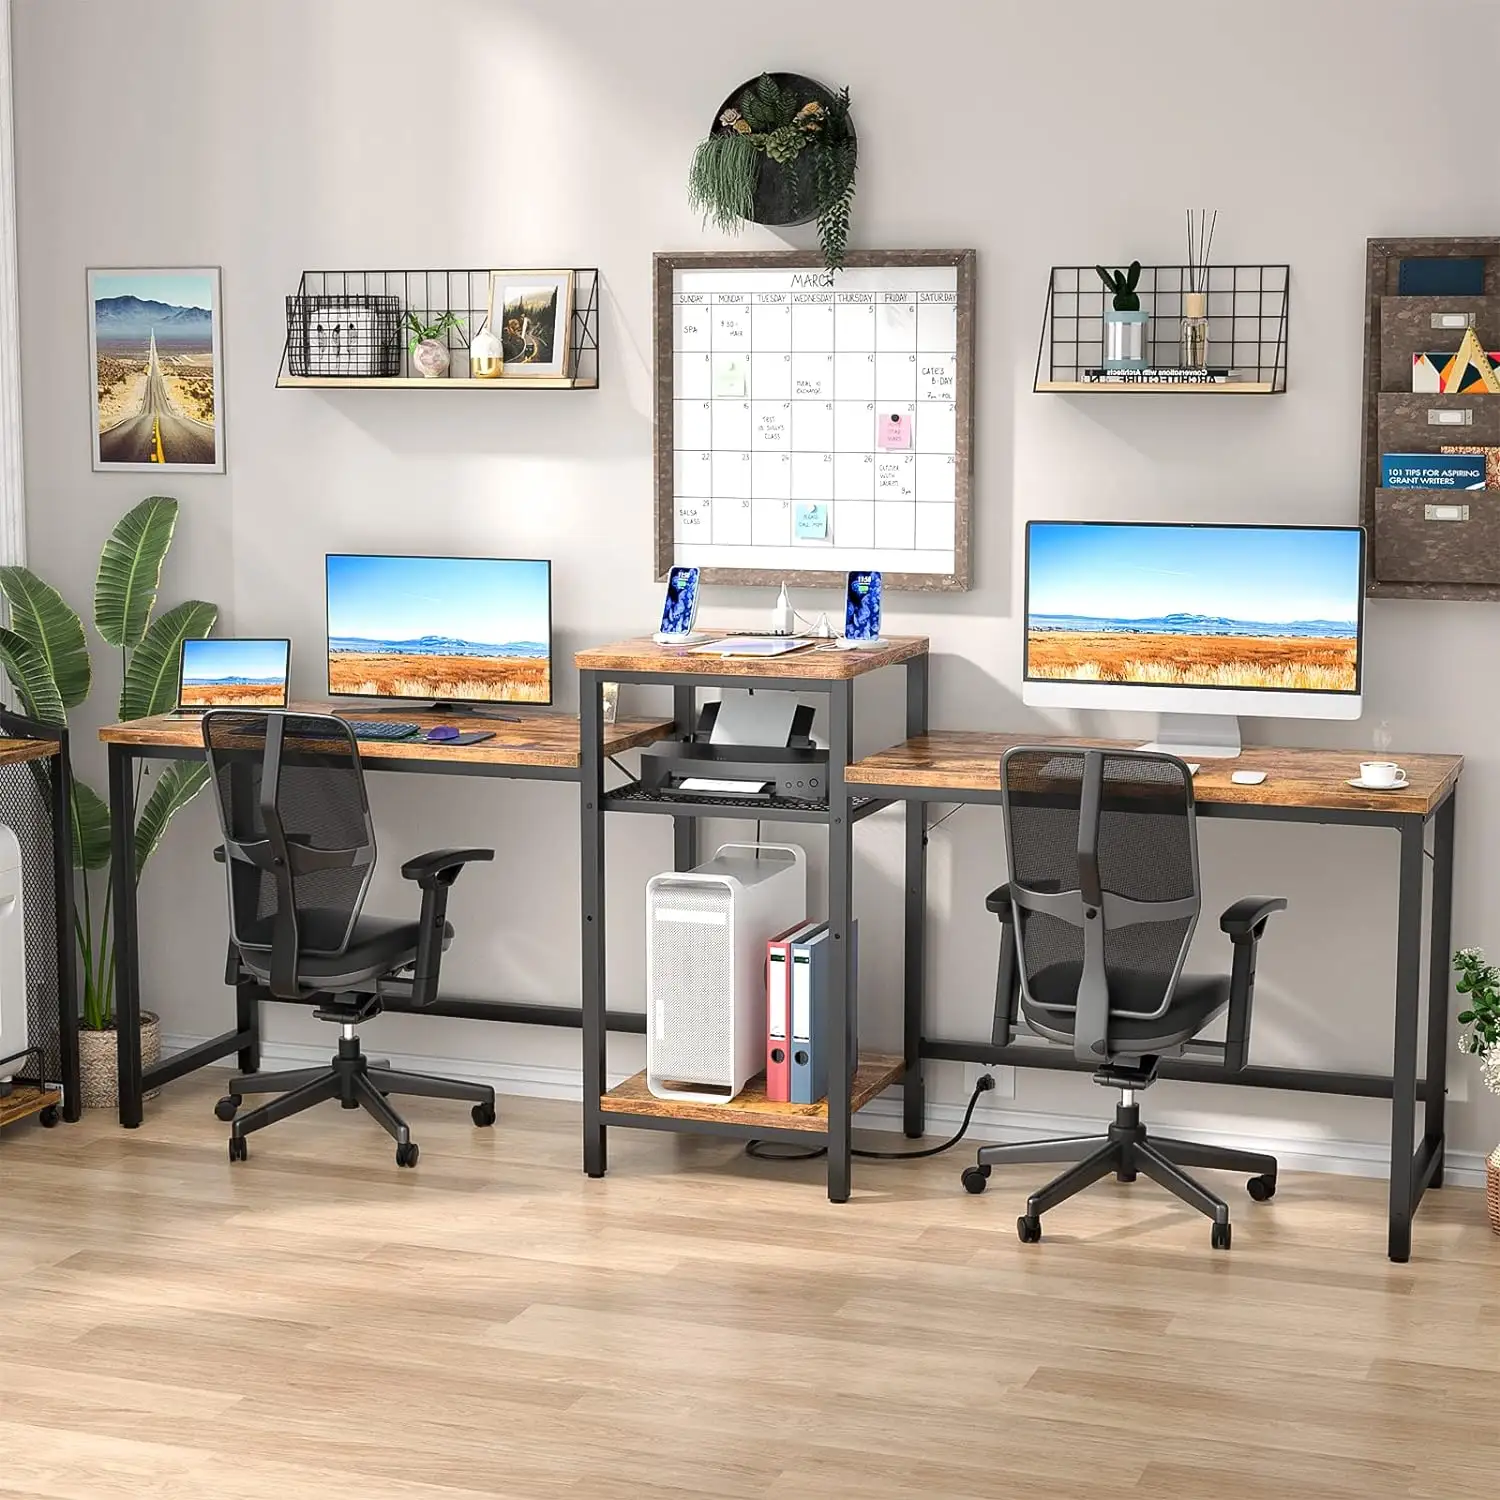 Double Long Office Table Game Two Person Computer Desk with Open Storage Shelves and Printer Stand for Home